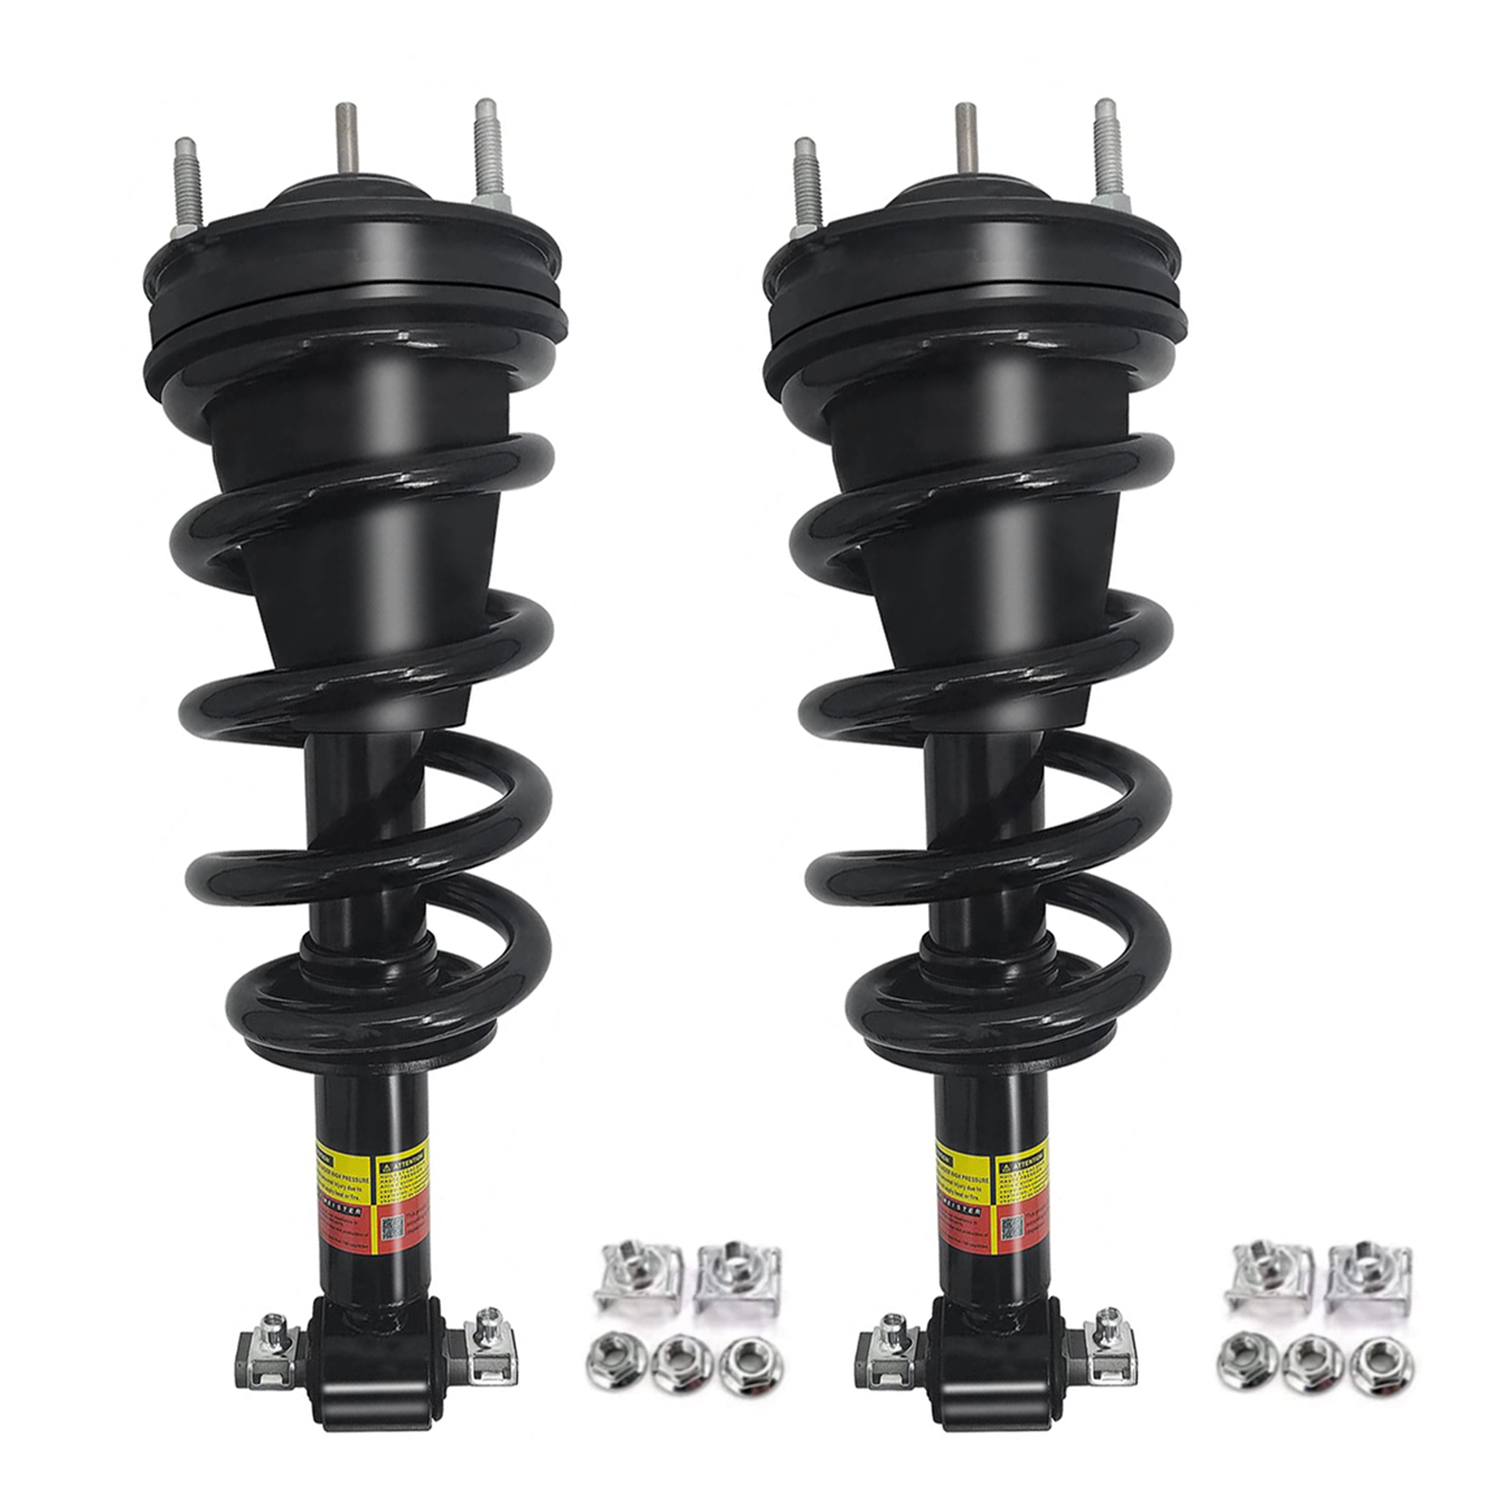 GMC Yukon Pair Front Magnetic Shock Absorber Assembly Fit 2007-2014 Chevrolet Silverado Tahoe, Suburban Avalanche Sierra 1500